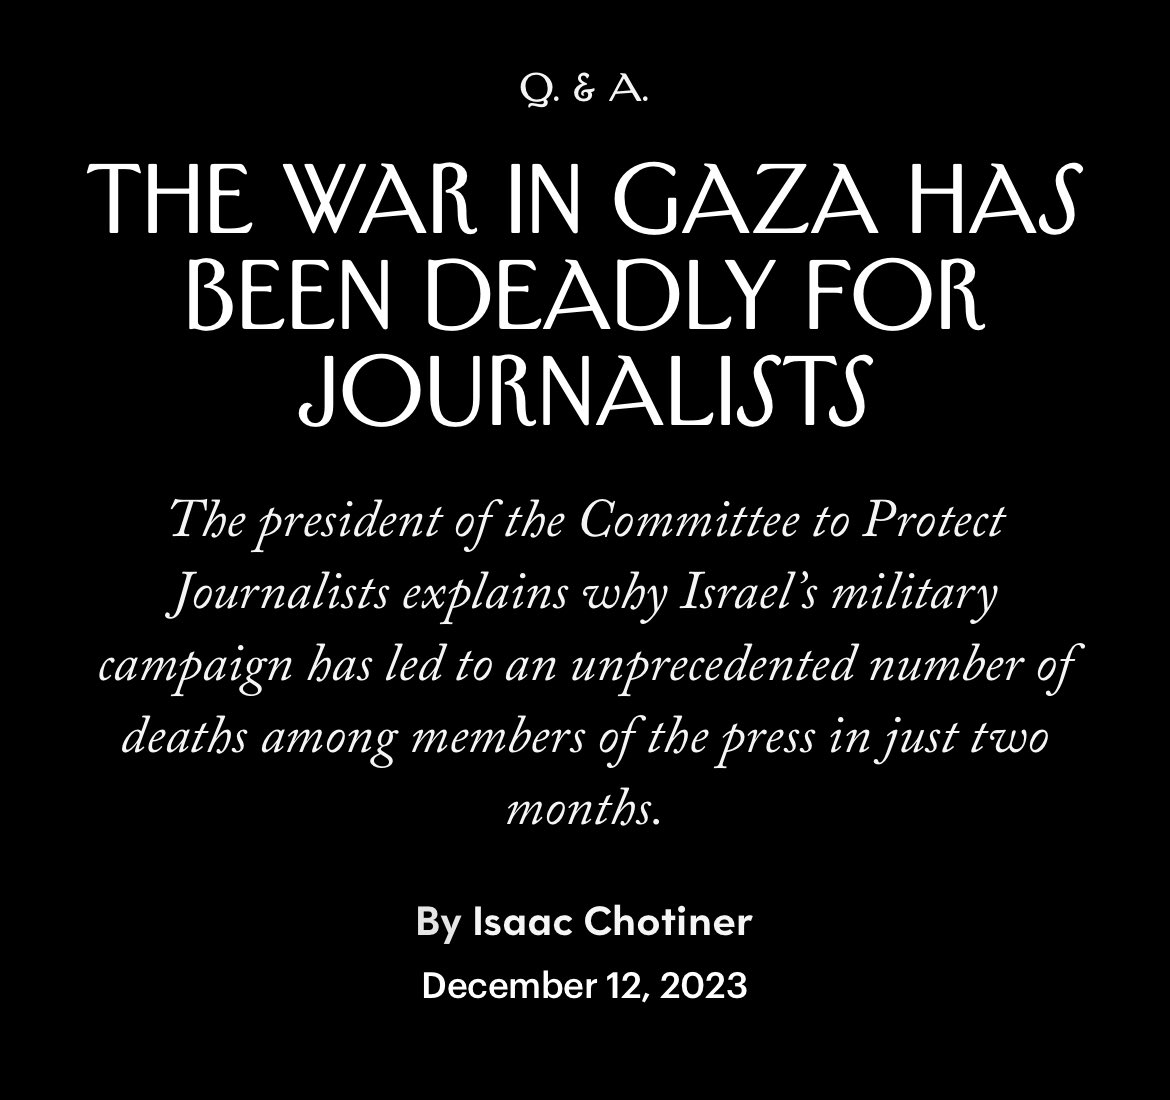 New Interview: I talked to Jodie Ginsberg, the president of the Committee to Protect Journalists, about Israel’s bombing of Gaza, which has caused an unprecedented number of journalist deaths for a conflict that has only lasted two months. newyorker.com/news/q-and-a/t…